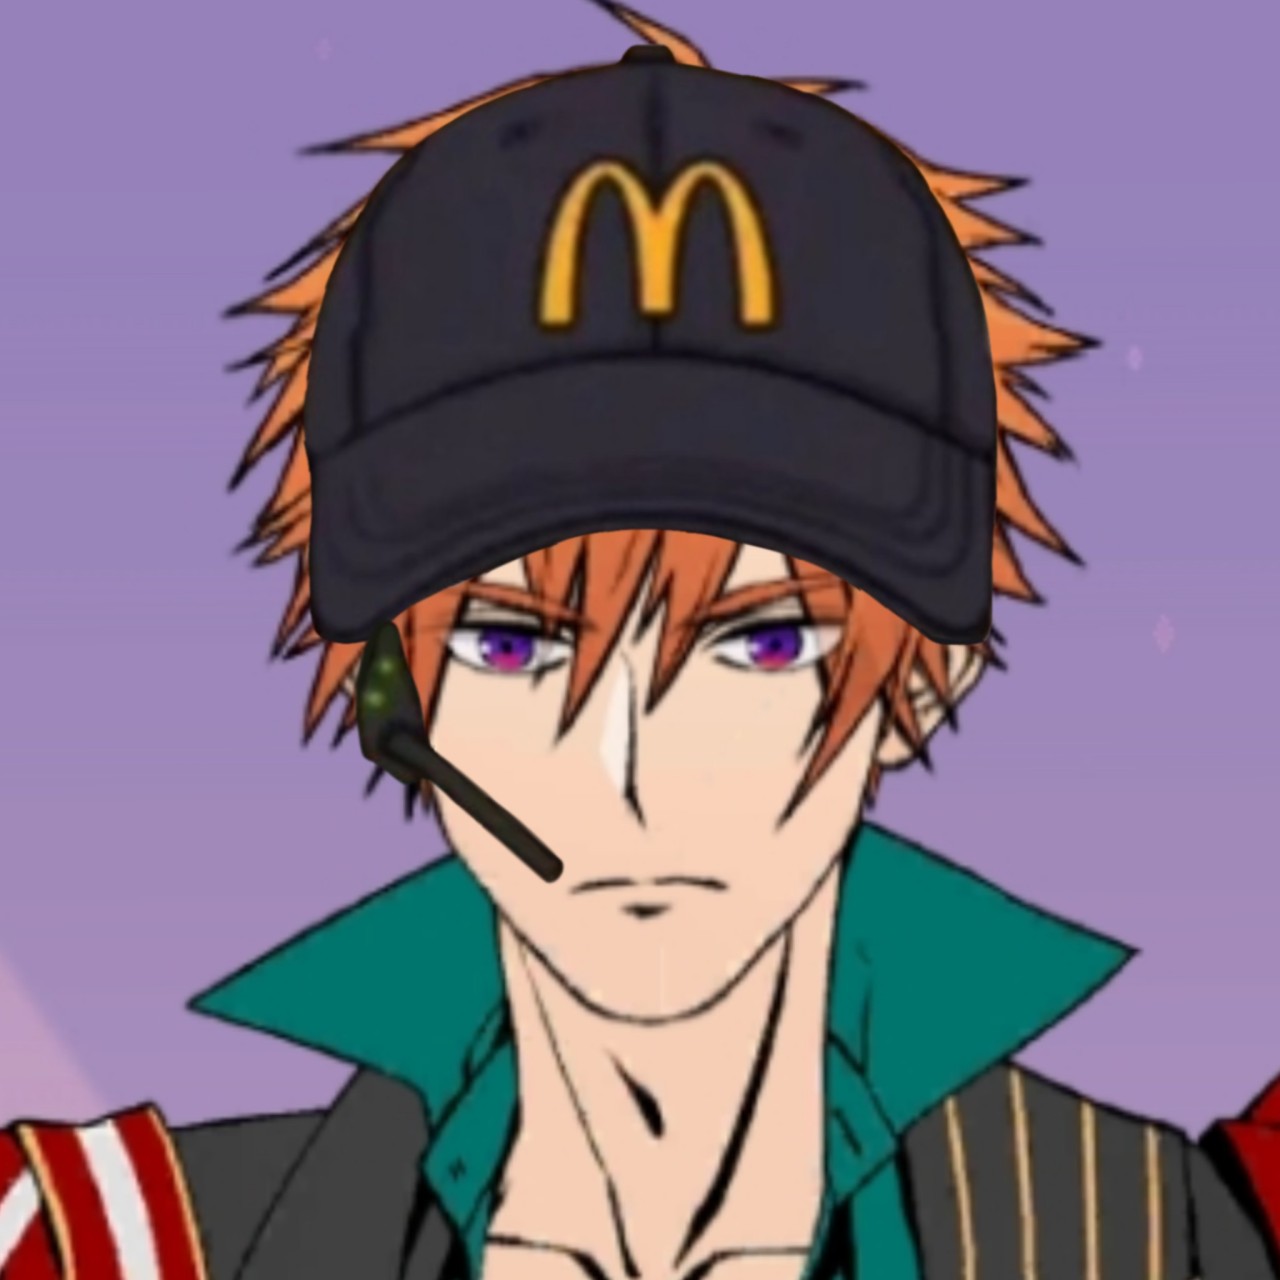 every mcdonalds icon known to man cropped in its original size pt 2 made  by albedoiism on tiktok  rGenshinImpact